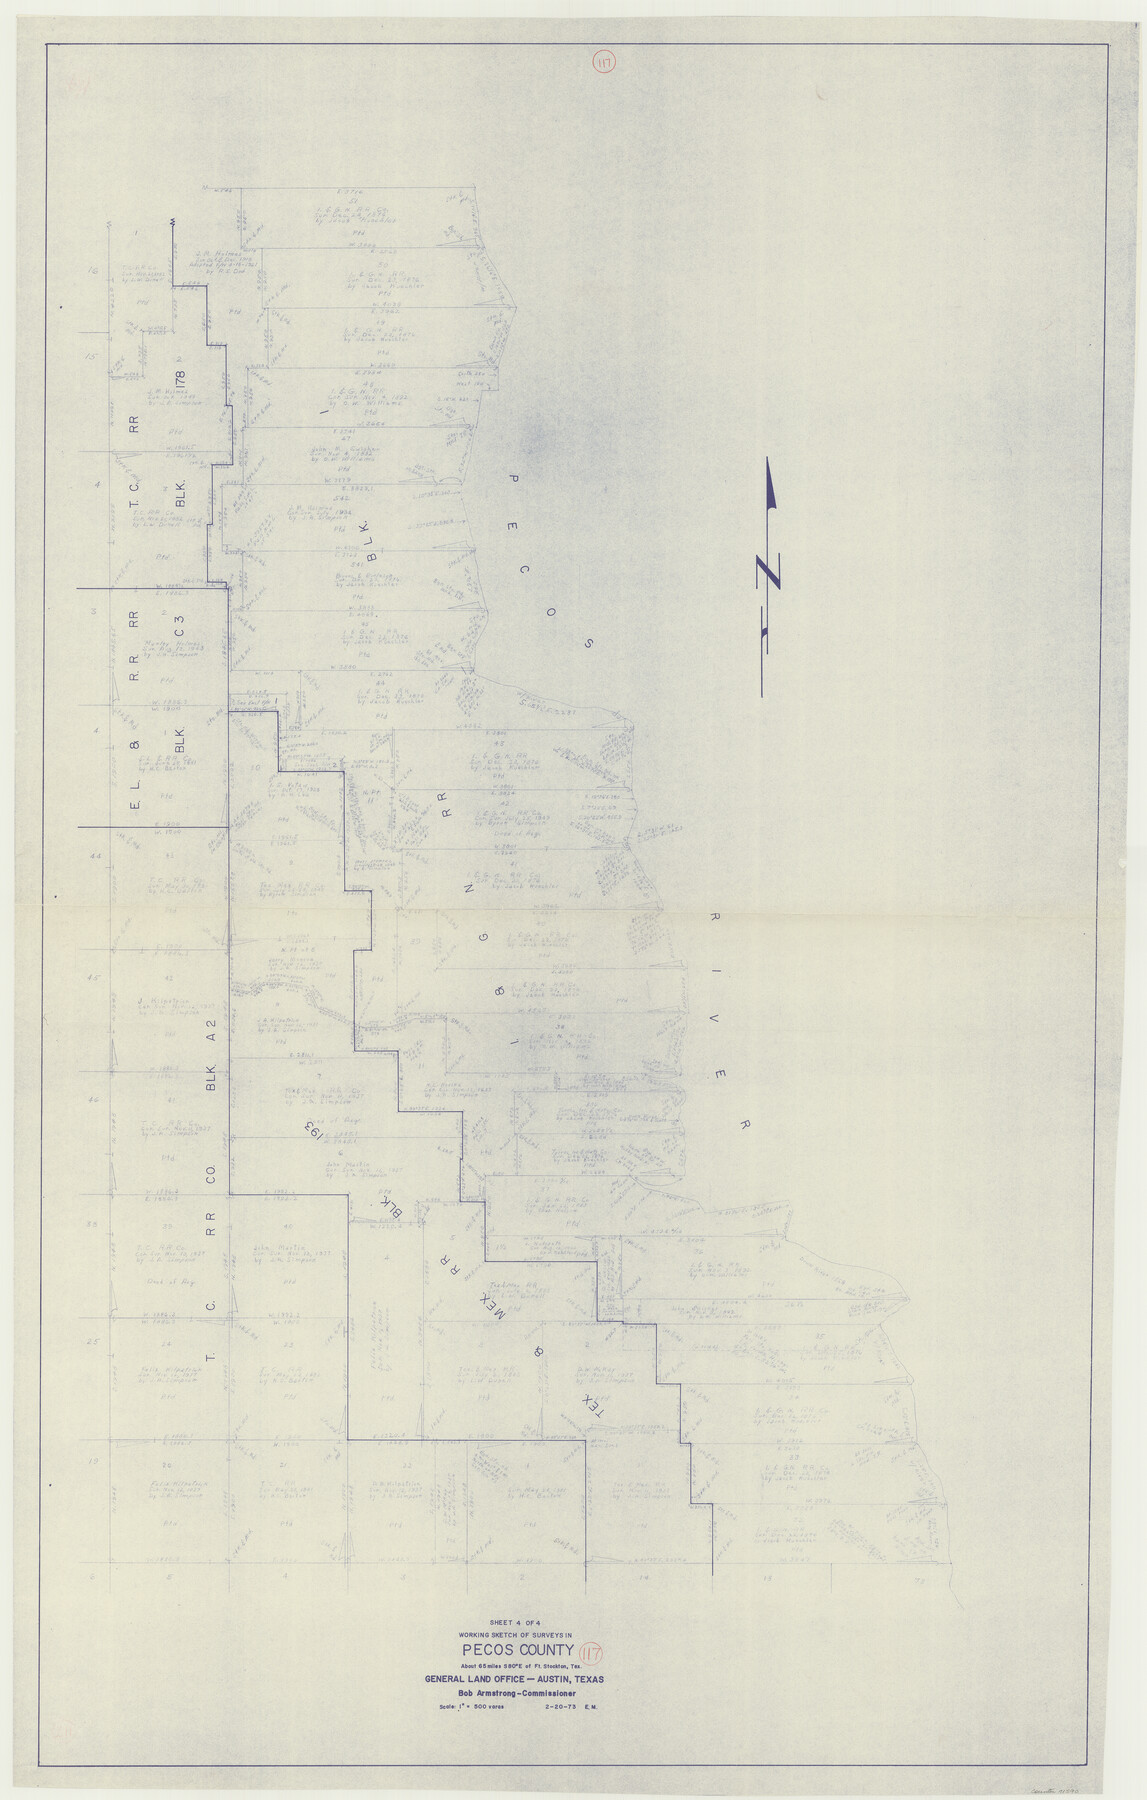 71590, Pecos County Working Sketch 117, General Map Collection